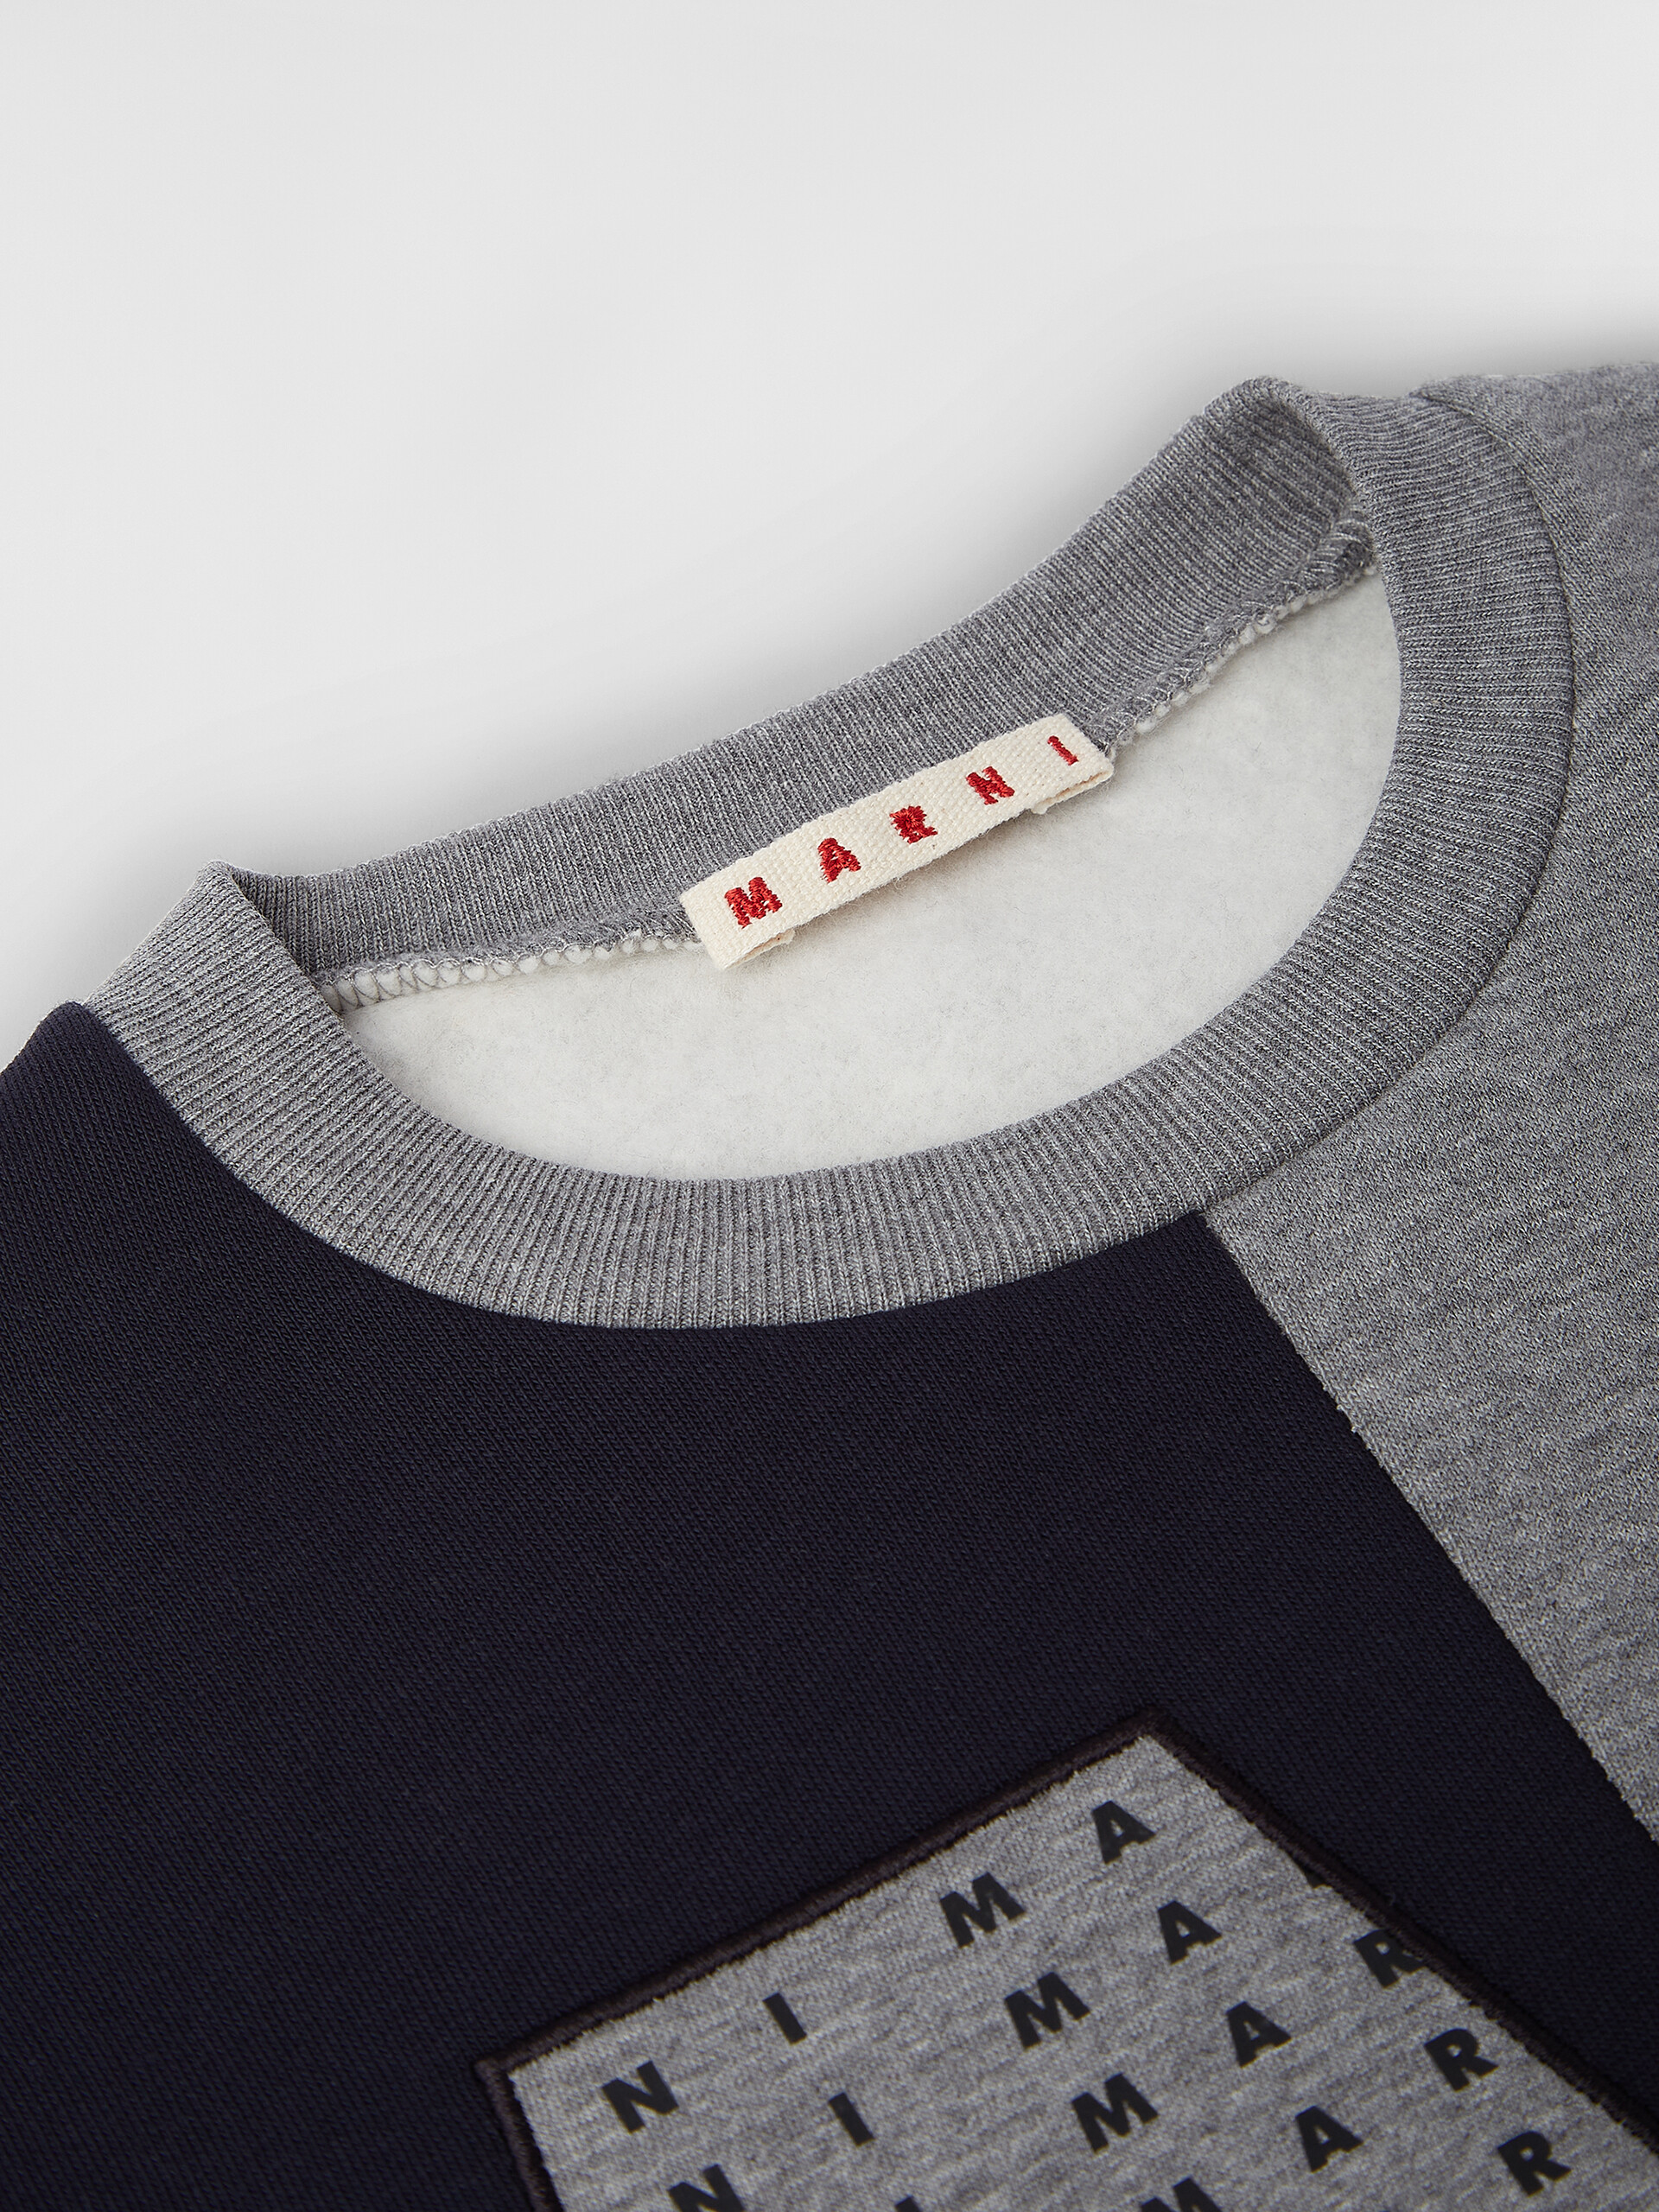 BICOLOR SWEATSHIRT WITH BIG "M" ON THE FRONT - Sweaters - Image 4